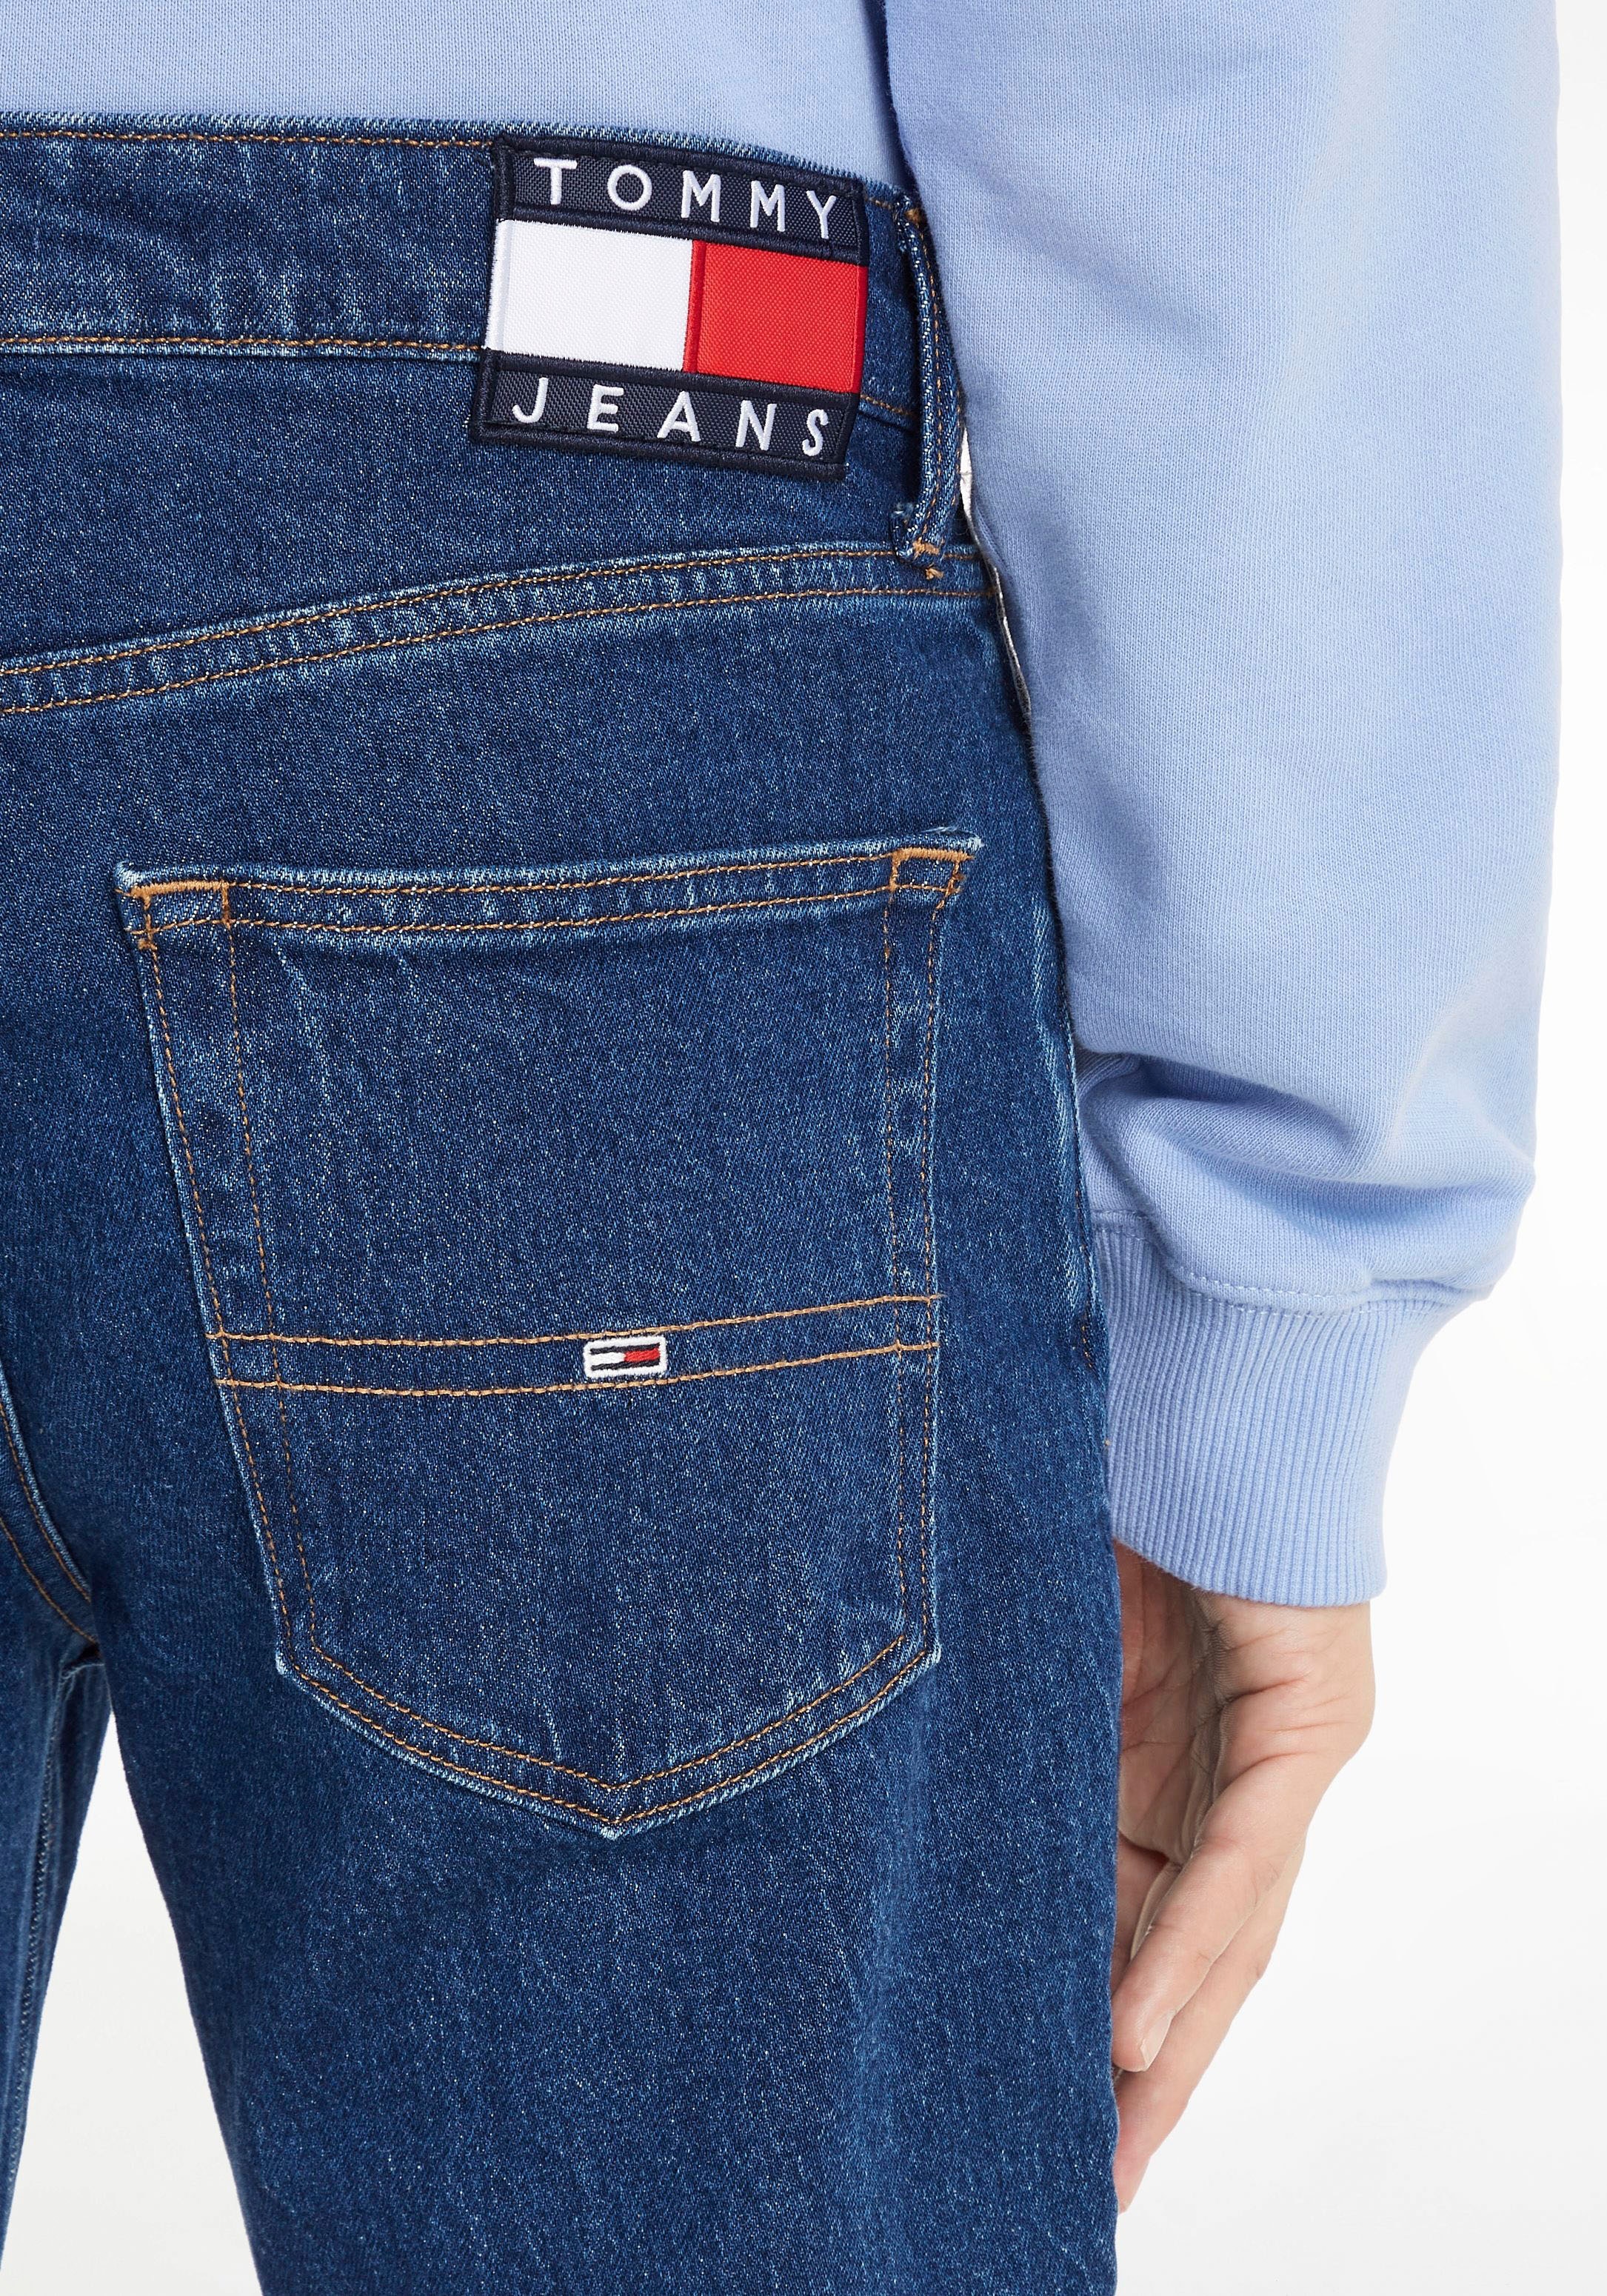 Tommy Jeans 5-Pocket-Jeans »SCANTON SLIM OTTO bei CG4139«